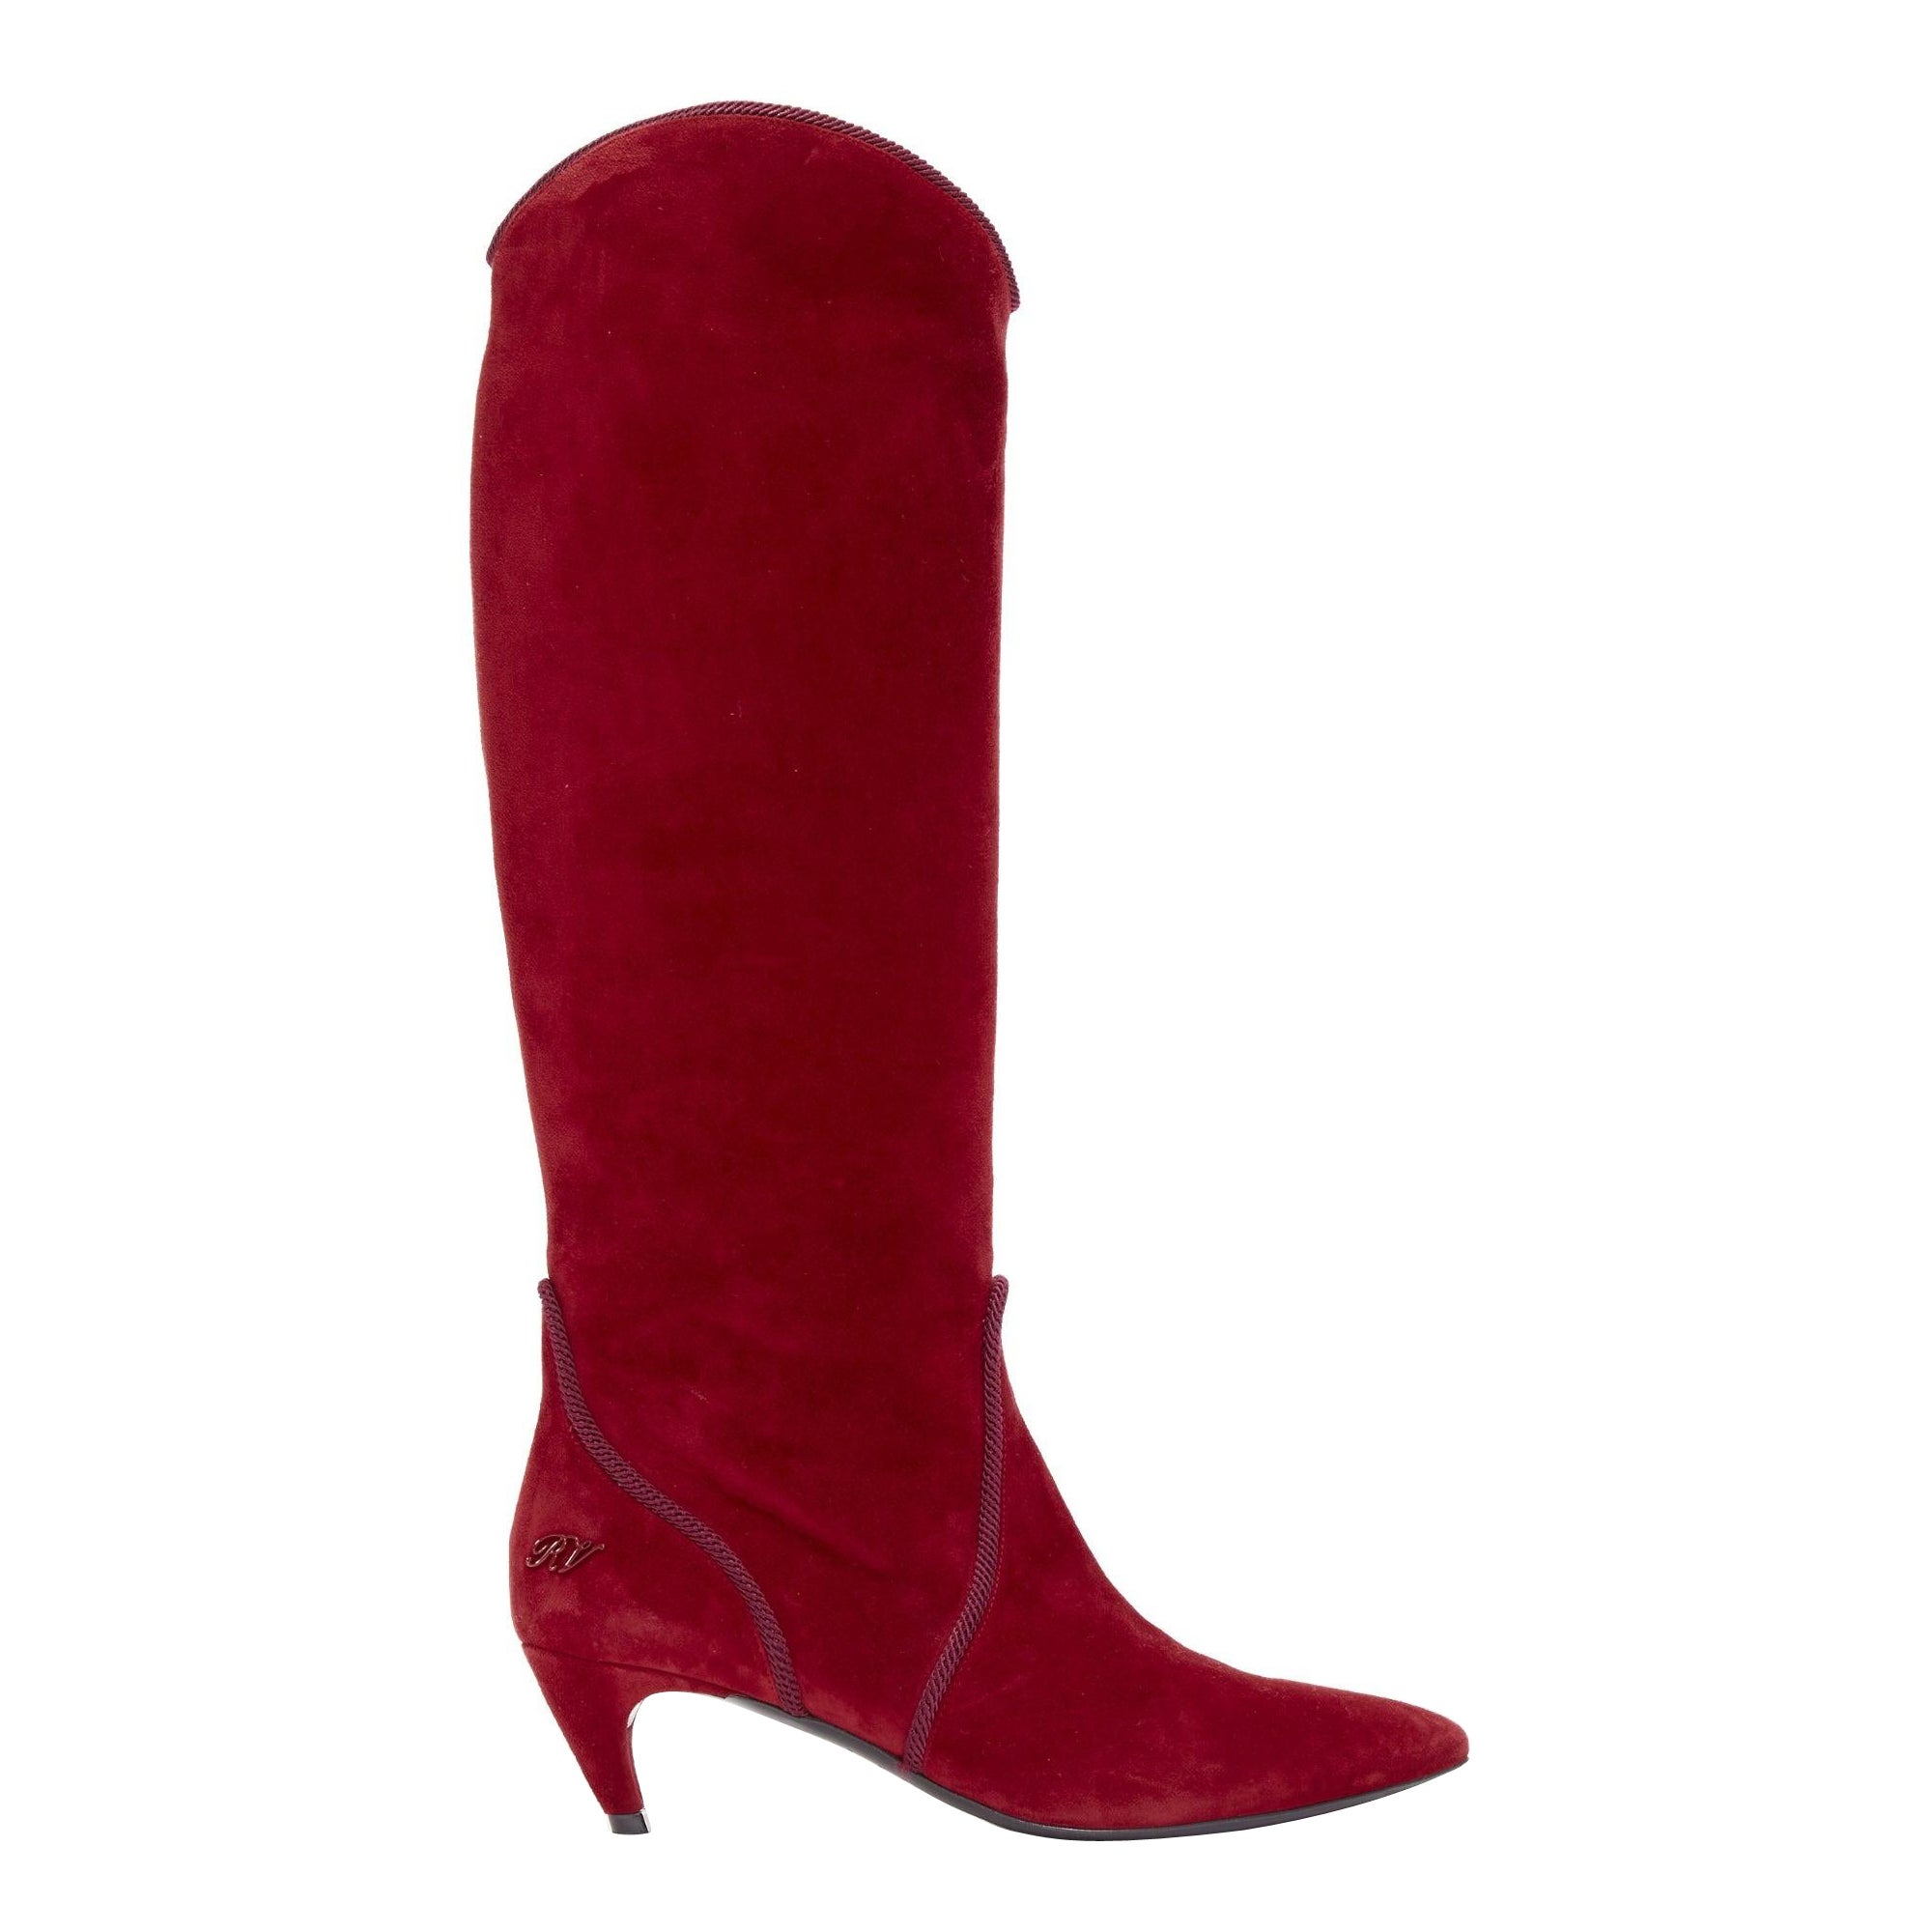 ROGER VIVIER red suede purple piping RV charm kitten heel cowboy boot EU37.5 For Sale